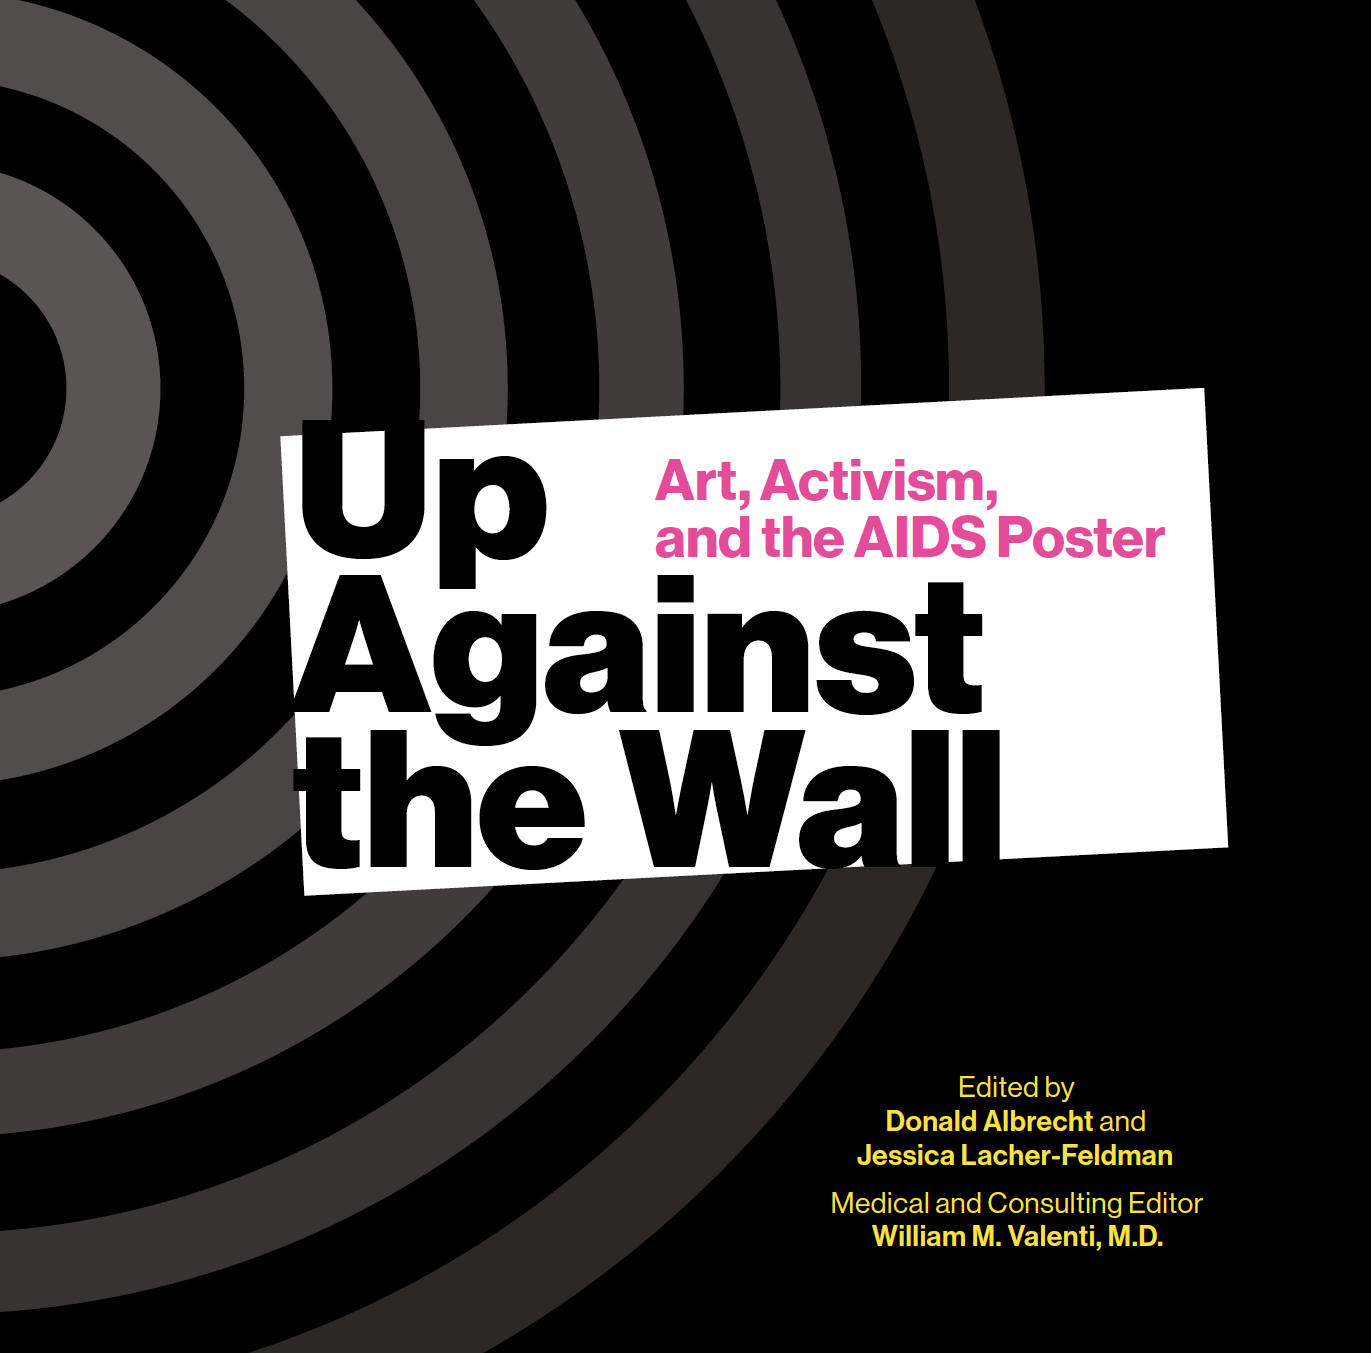 Up Against the Wall: Art, Activism, and the AIDS Poster